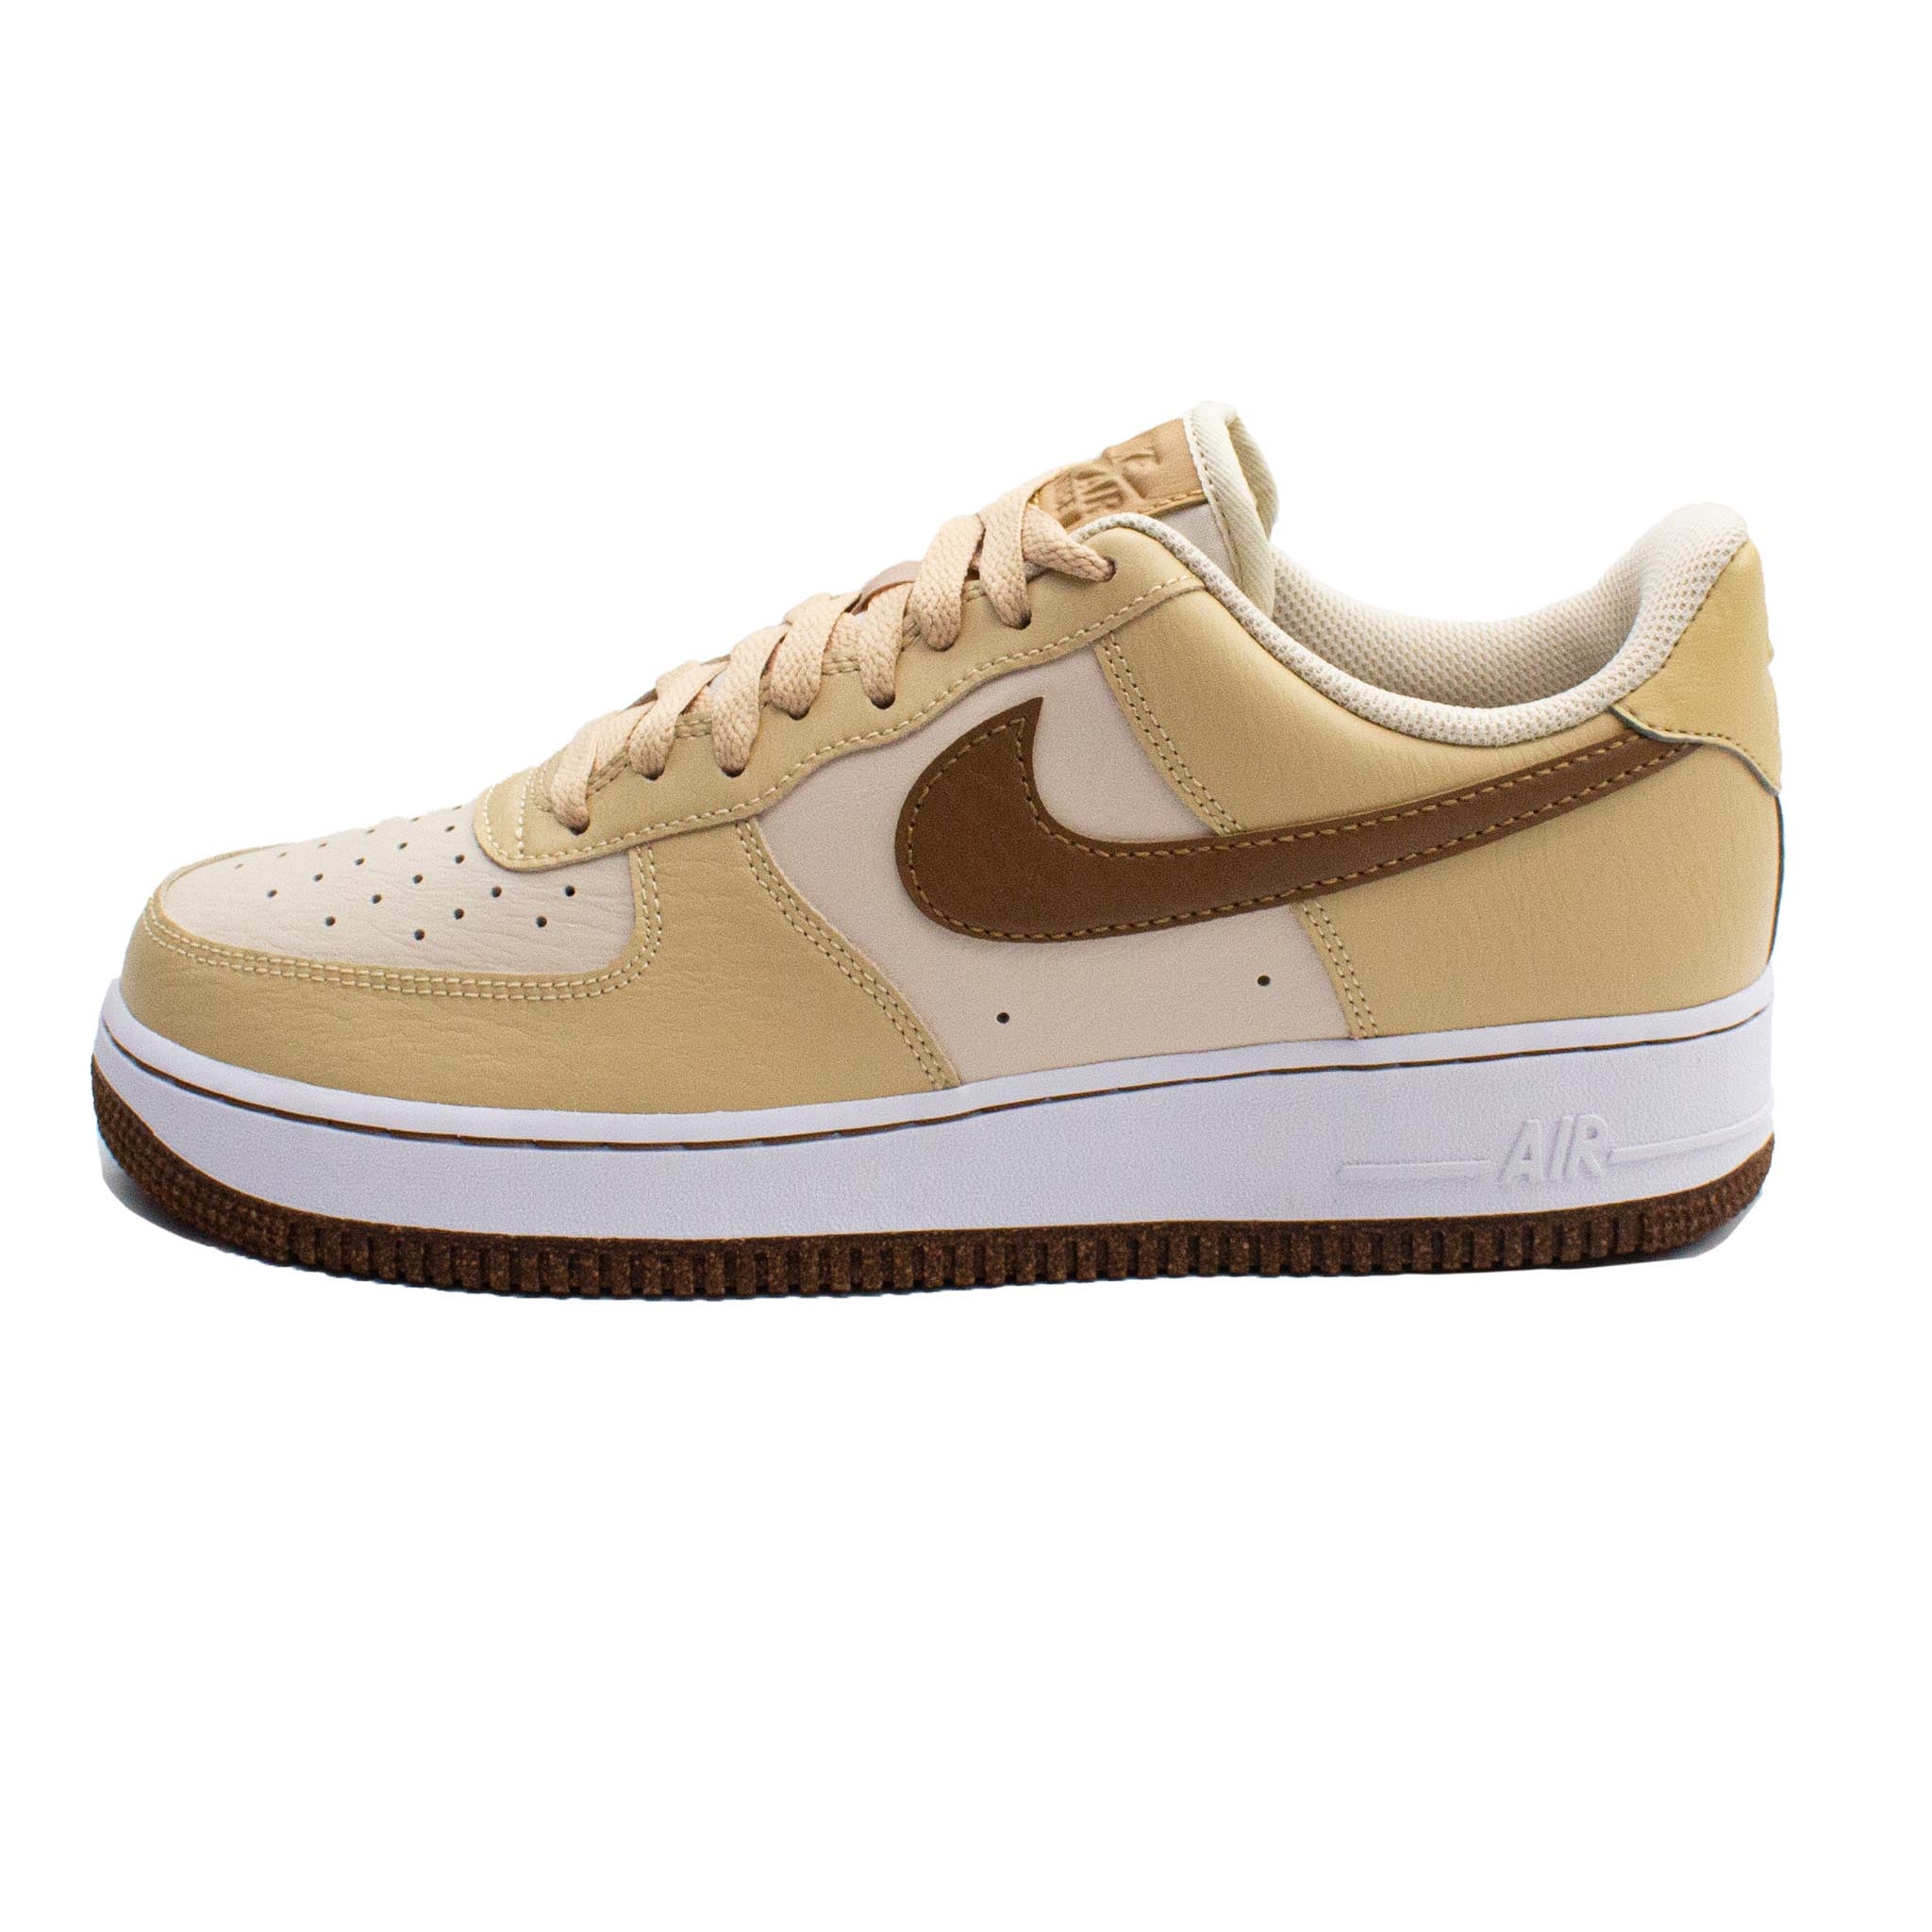 Nike Air Force 1 '07 LV8 'Inspected By Swoosh